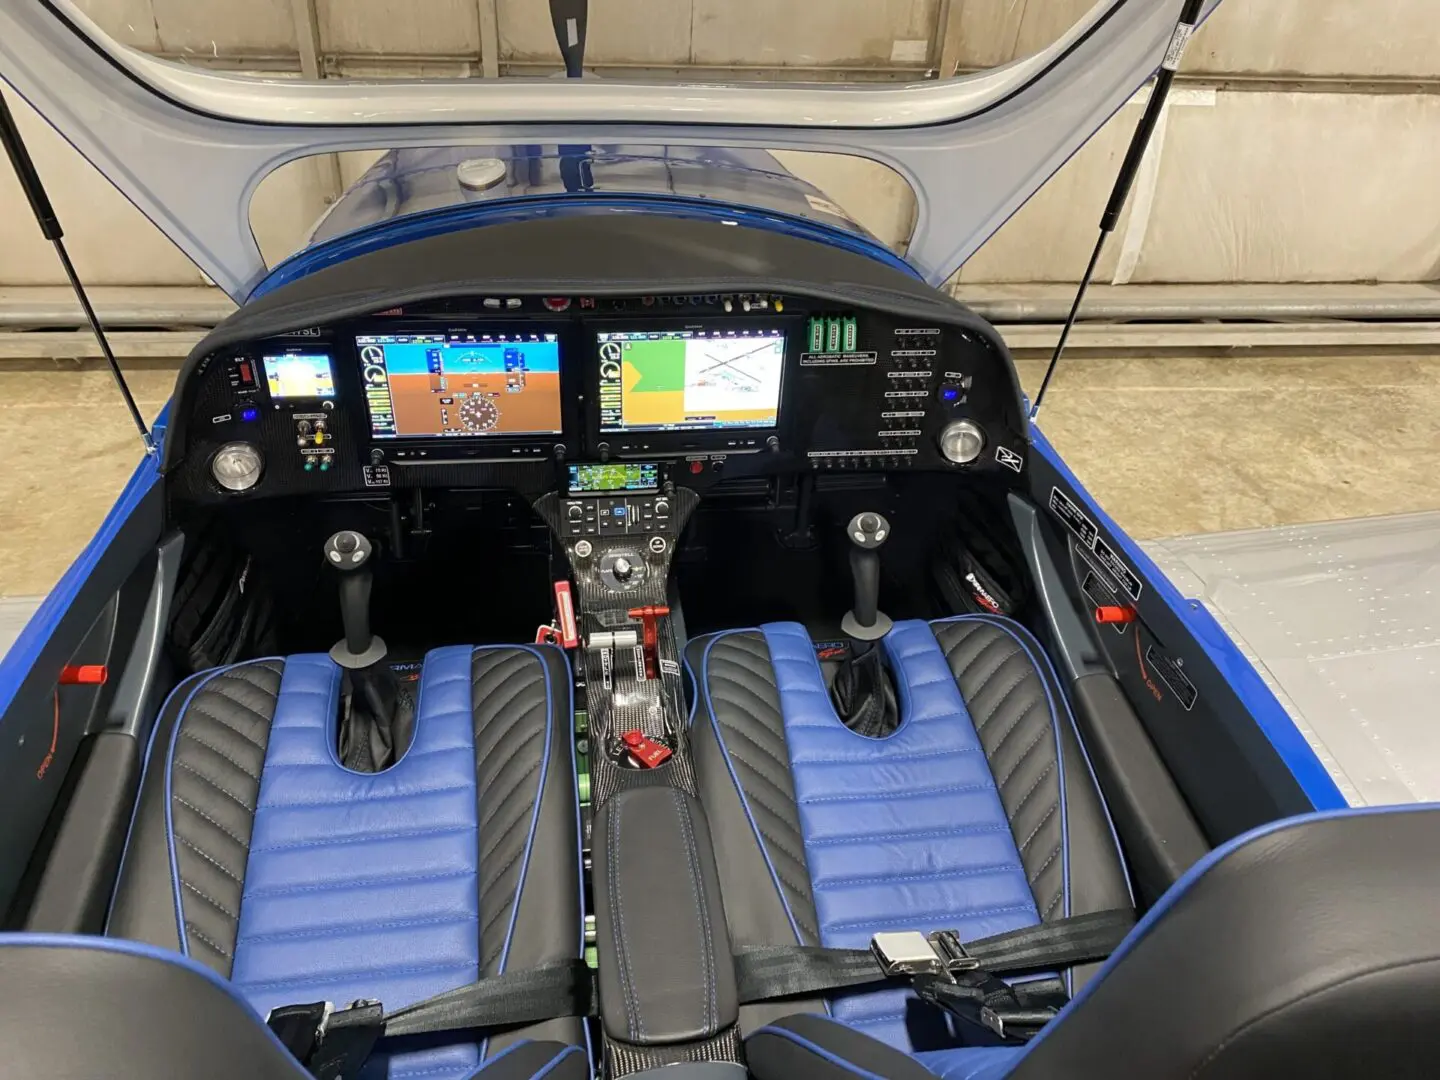 A view of the cockpit of an airplane.